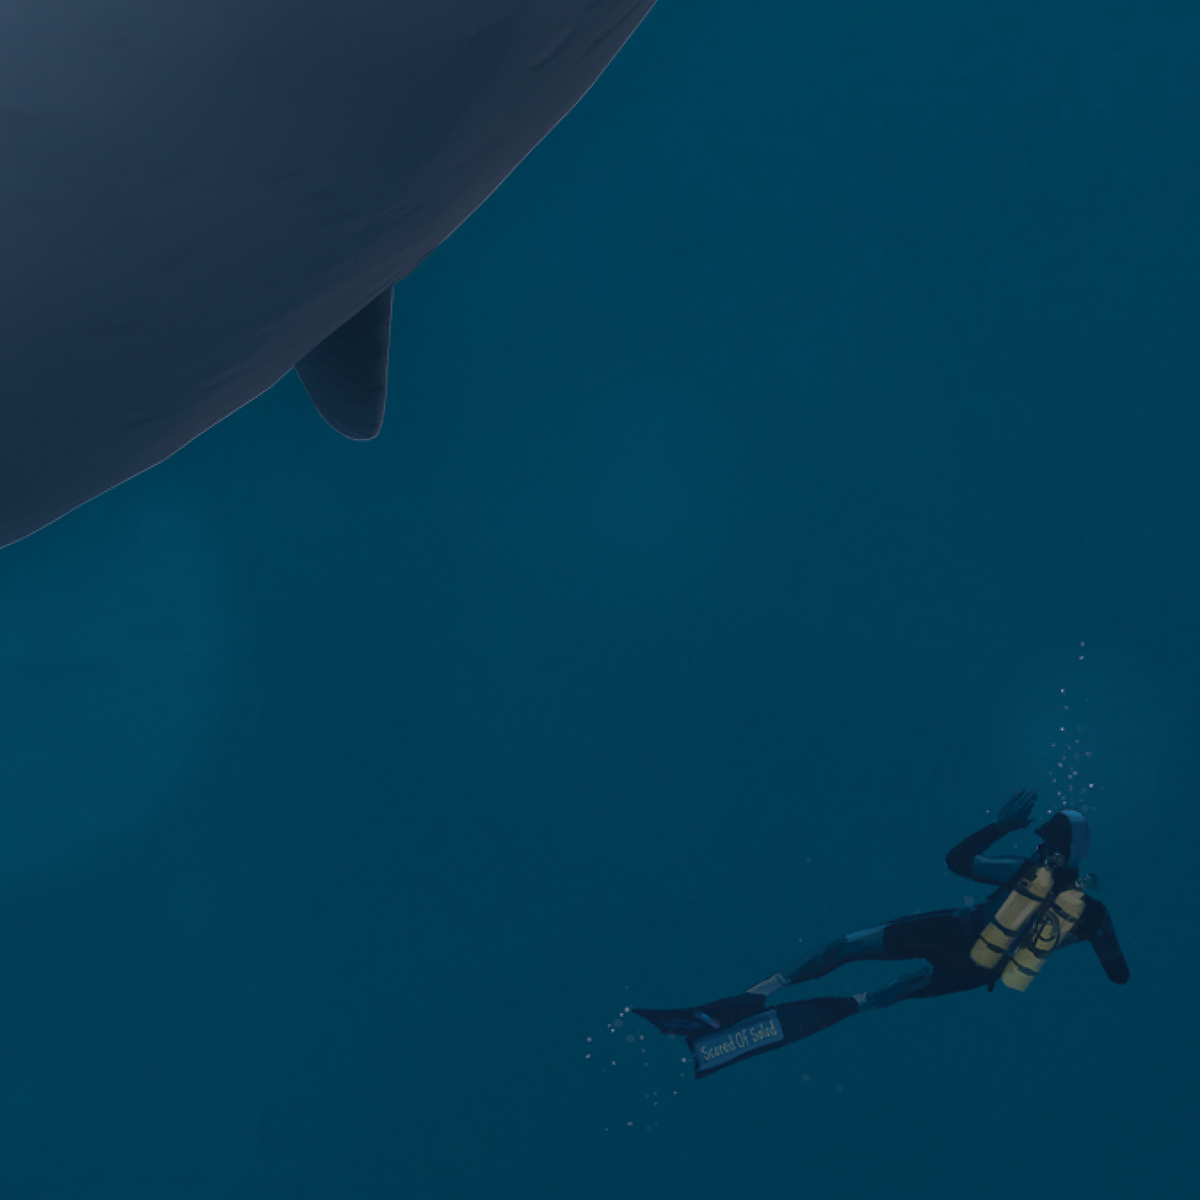 A diver observes the whale